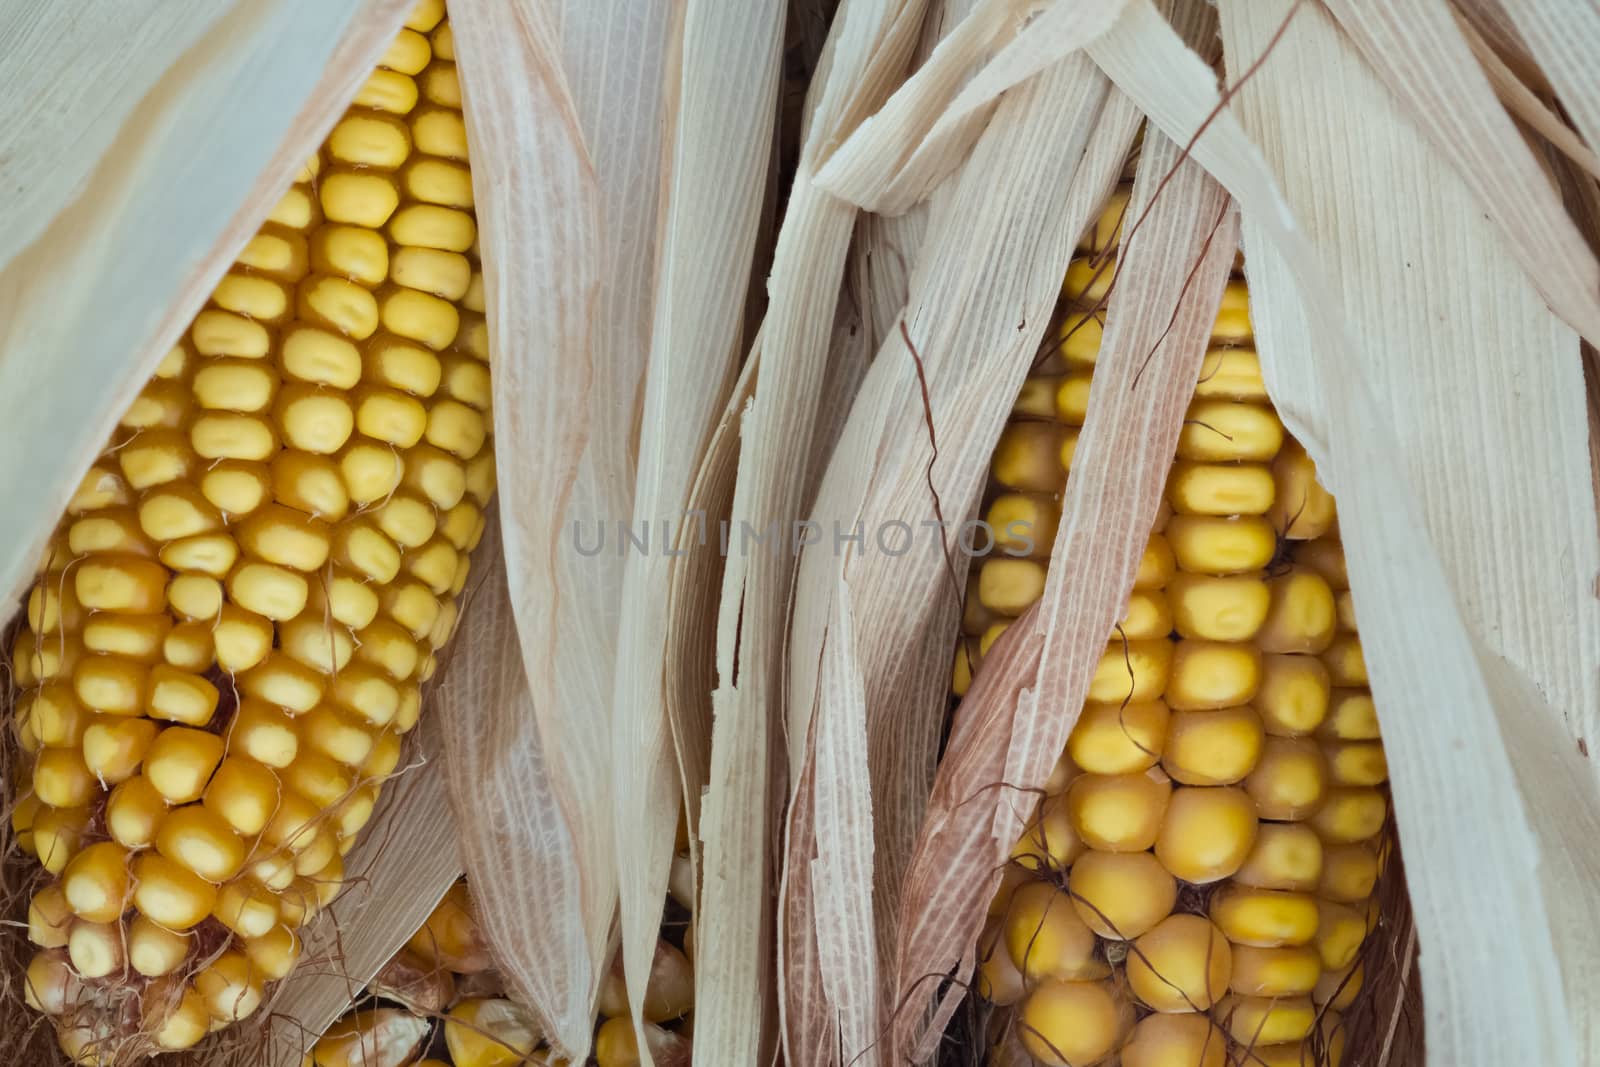 Two semi-purified cob of corn with grain, silk and dry leaves.